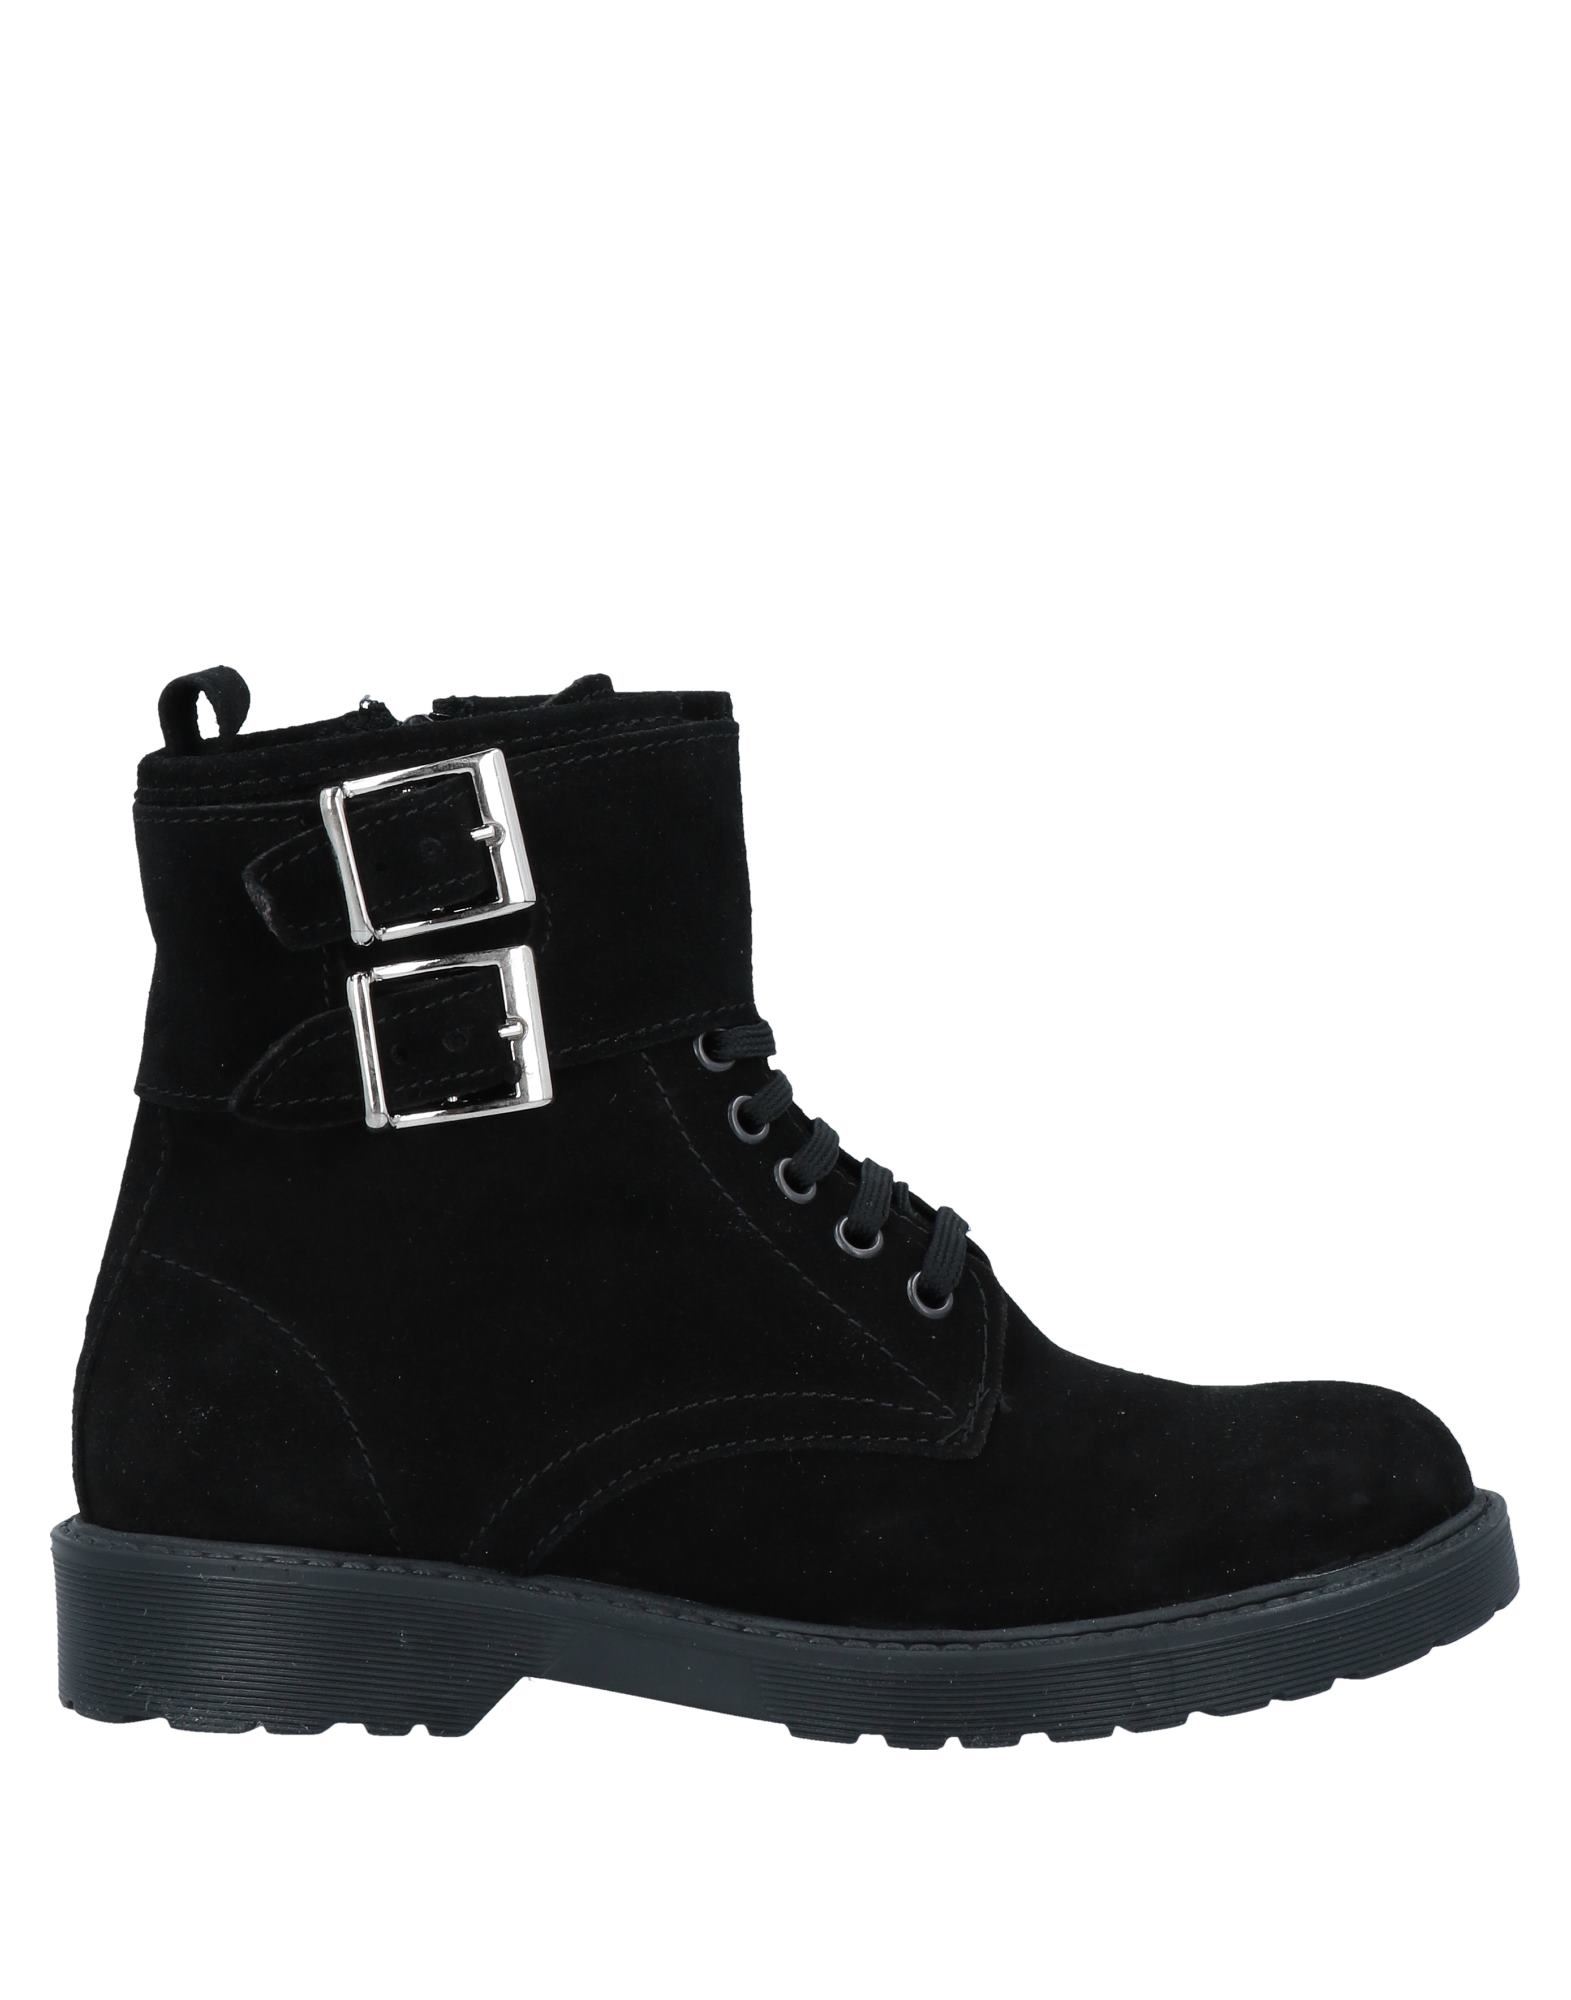 Tsd12 Ankle Boots In Black